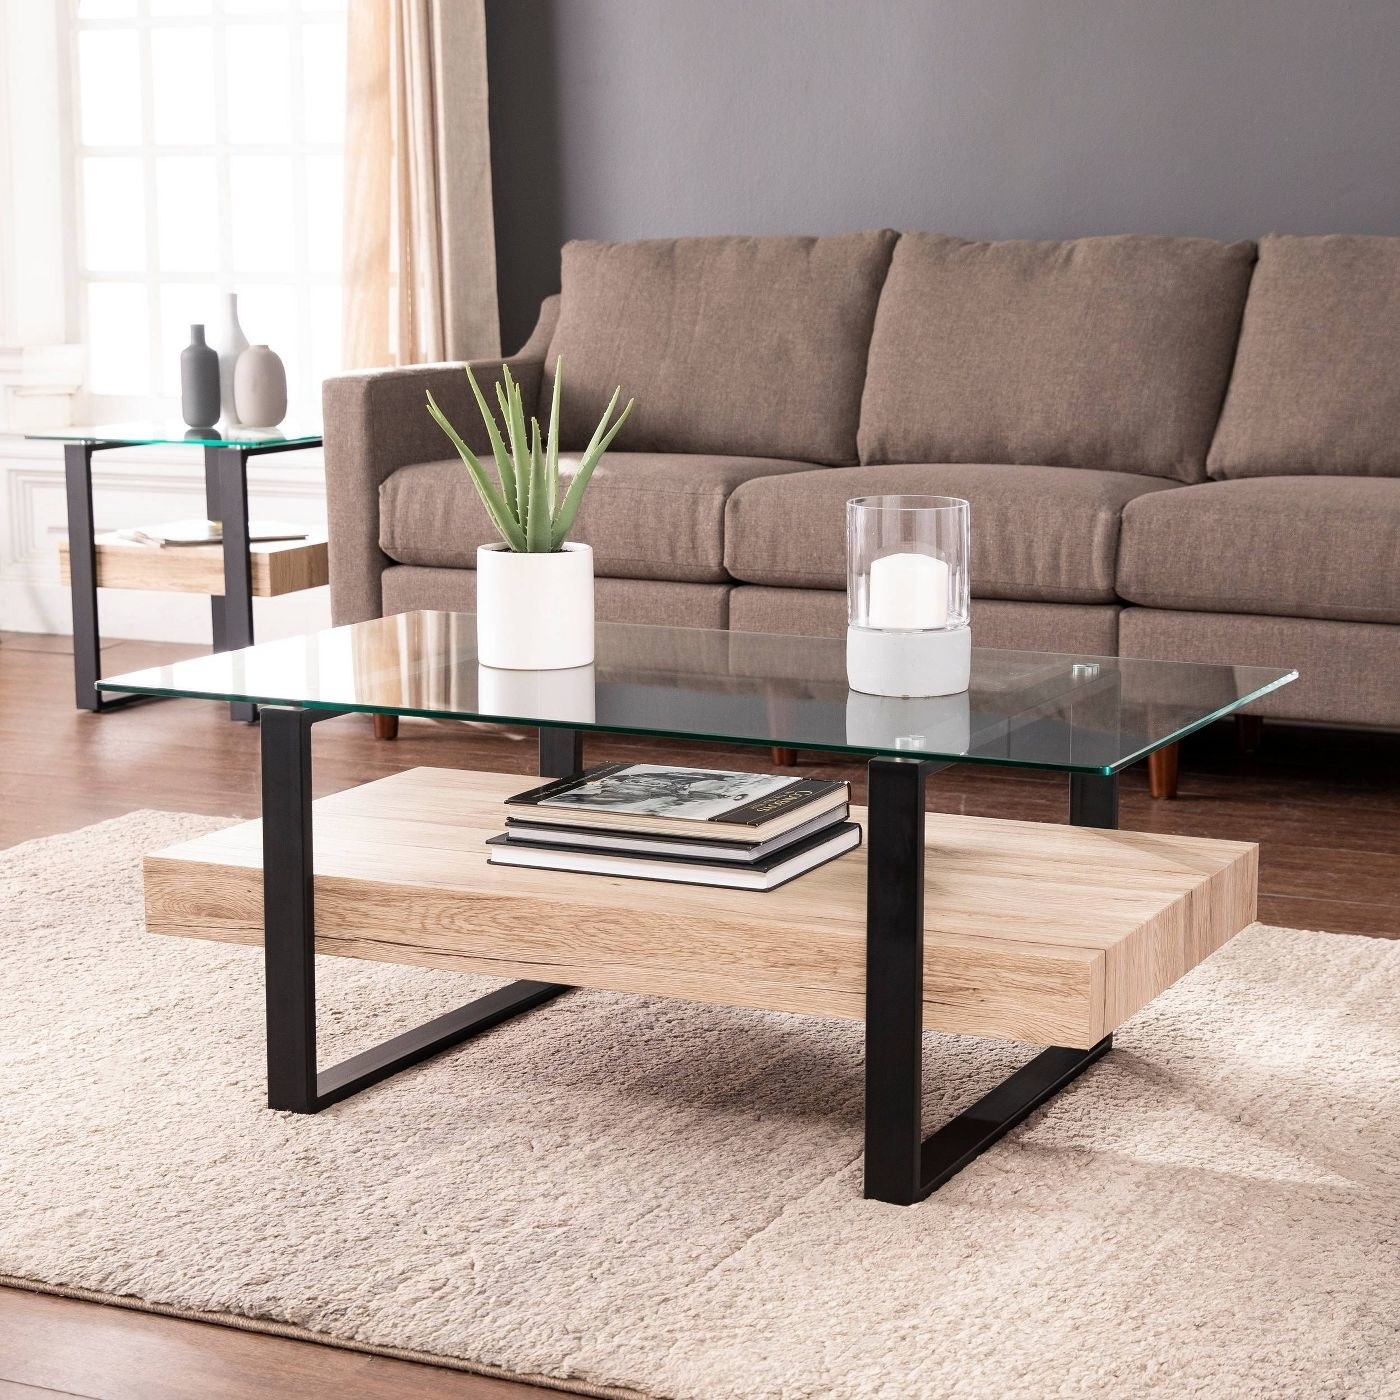 The natural wood, black hardware, and glass top table in a living room